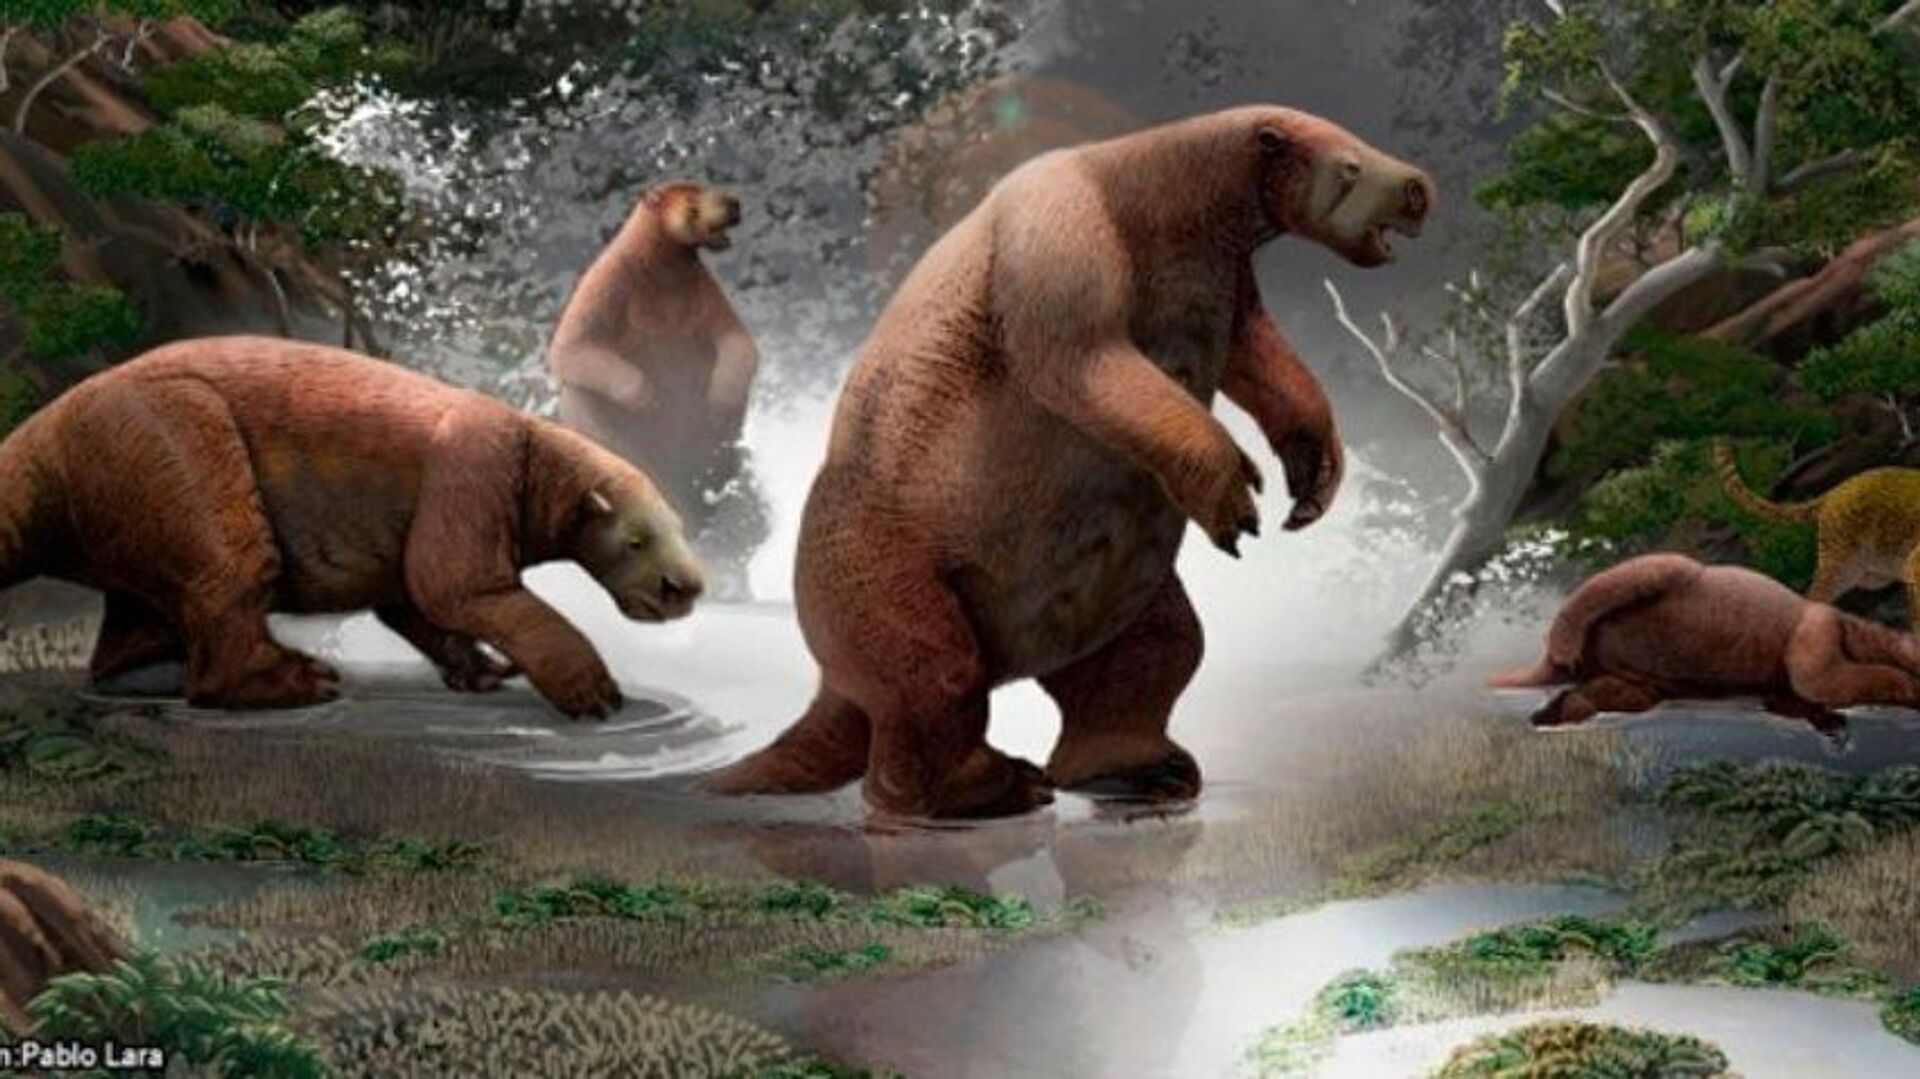 Palaeontologists Offer New Clues to One-Ton 'South-American Yeti' That Went Extinct 10,000 Years Ago - Sputnik International, 1920, 18.03.2022